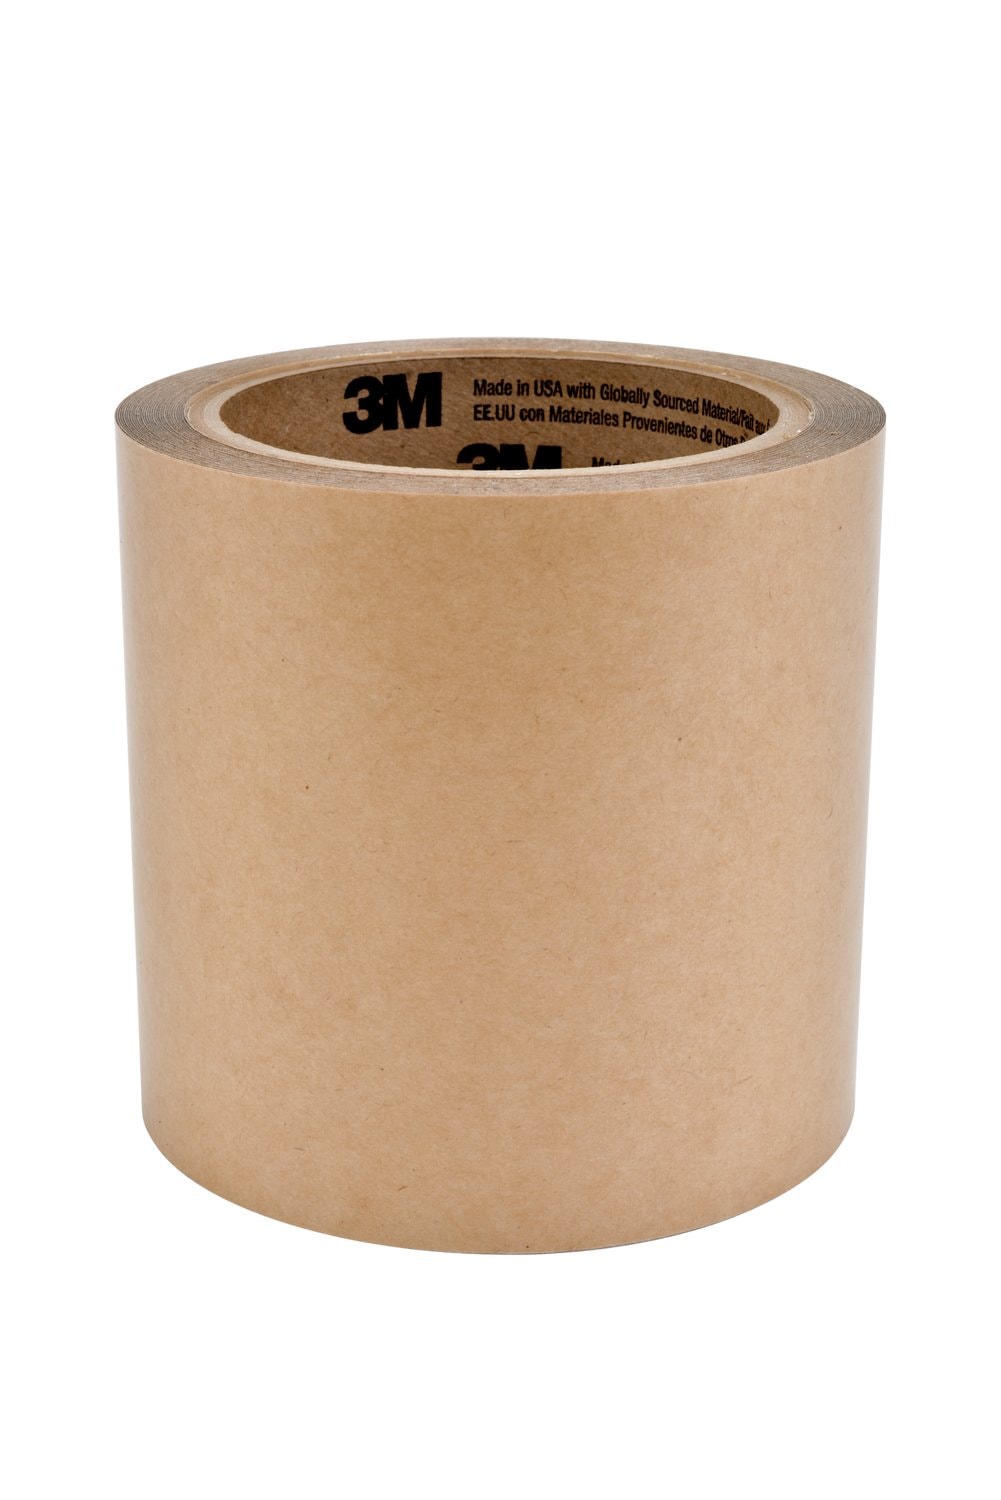 7100232381 - 3M Adhesive Transfer Tape L3+T5, Clear, 48 in x 250 yd, 5 mil, 1
Roll/Case, 3 Rolls/Pallet, Restricted